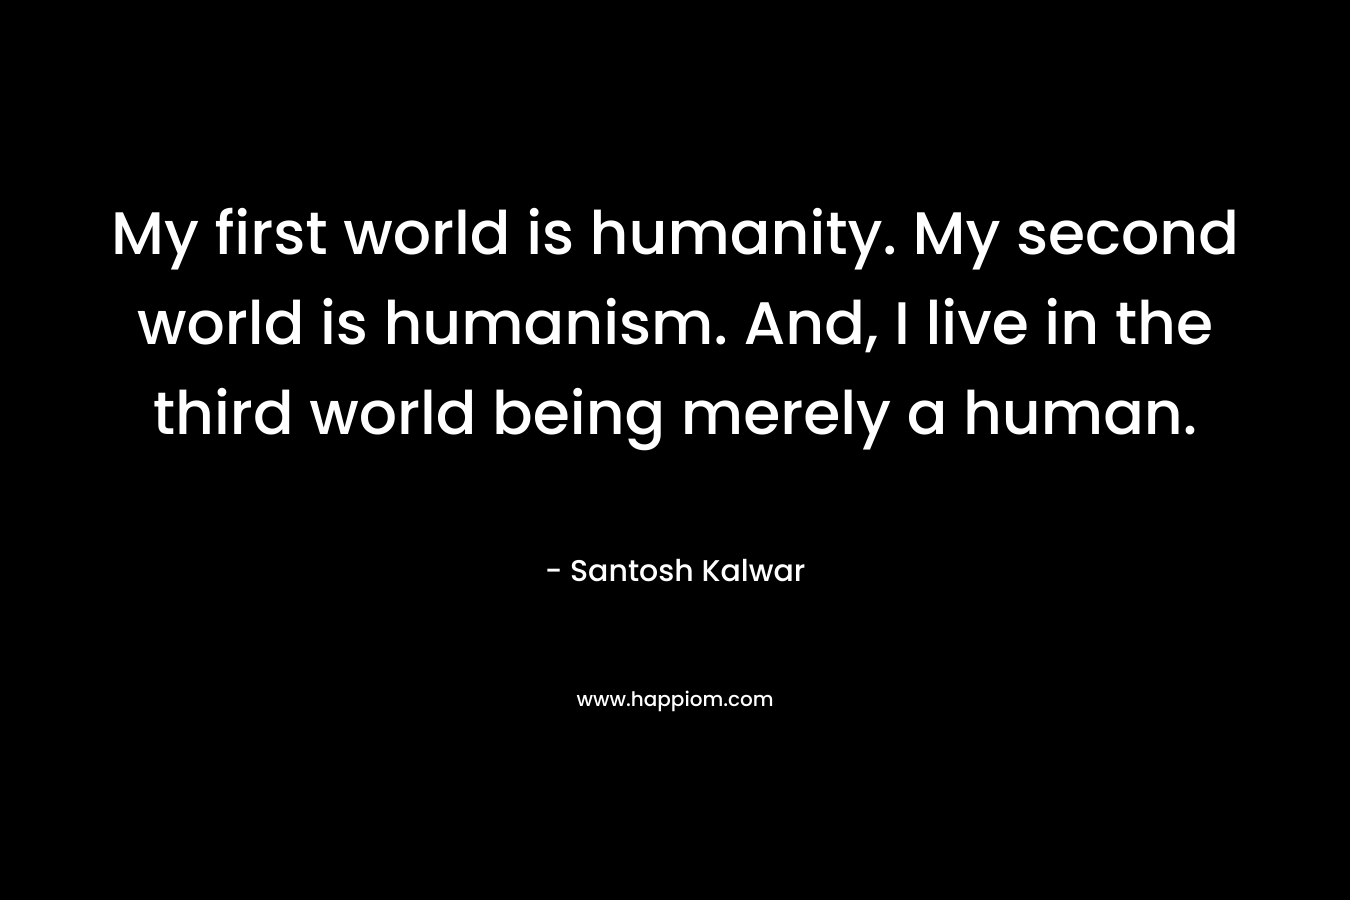 My first world is humanity. My second world is humanism. And, I live in the third world being merely a human.